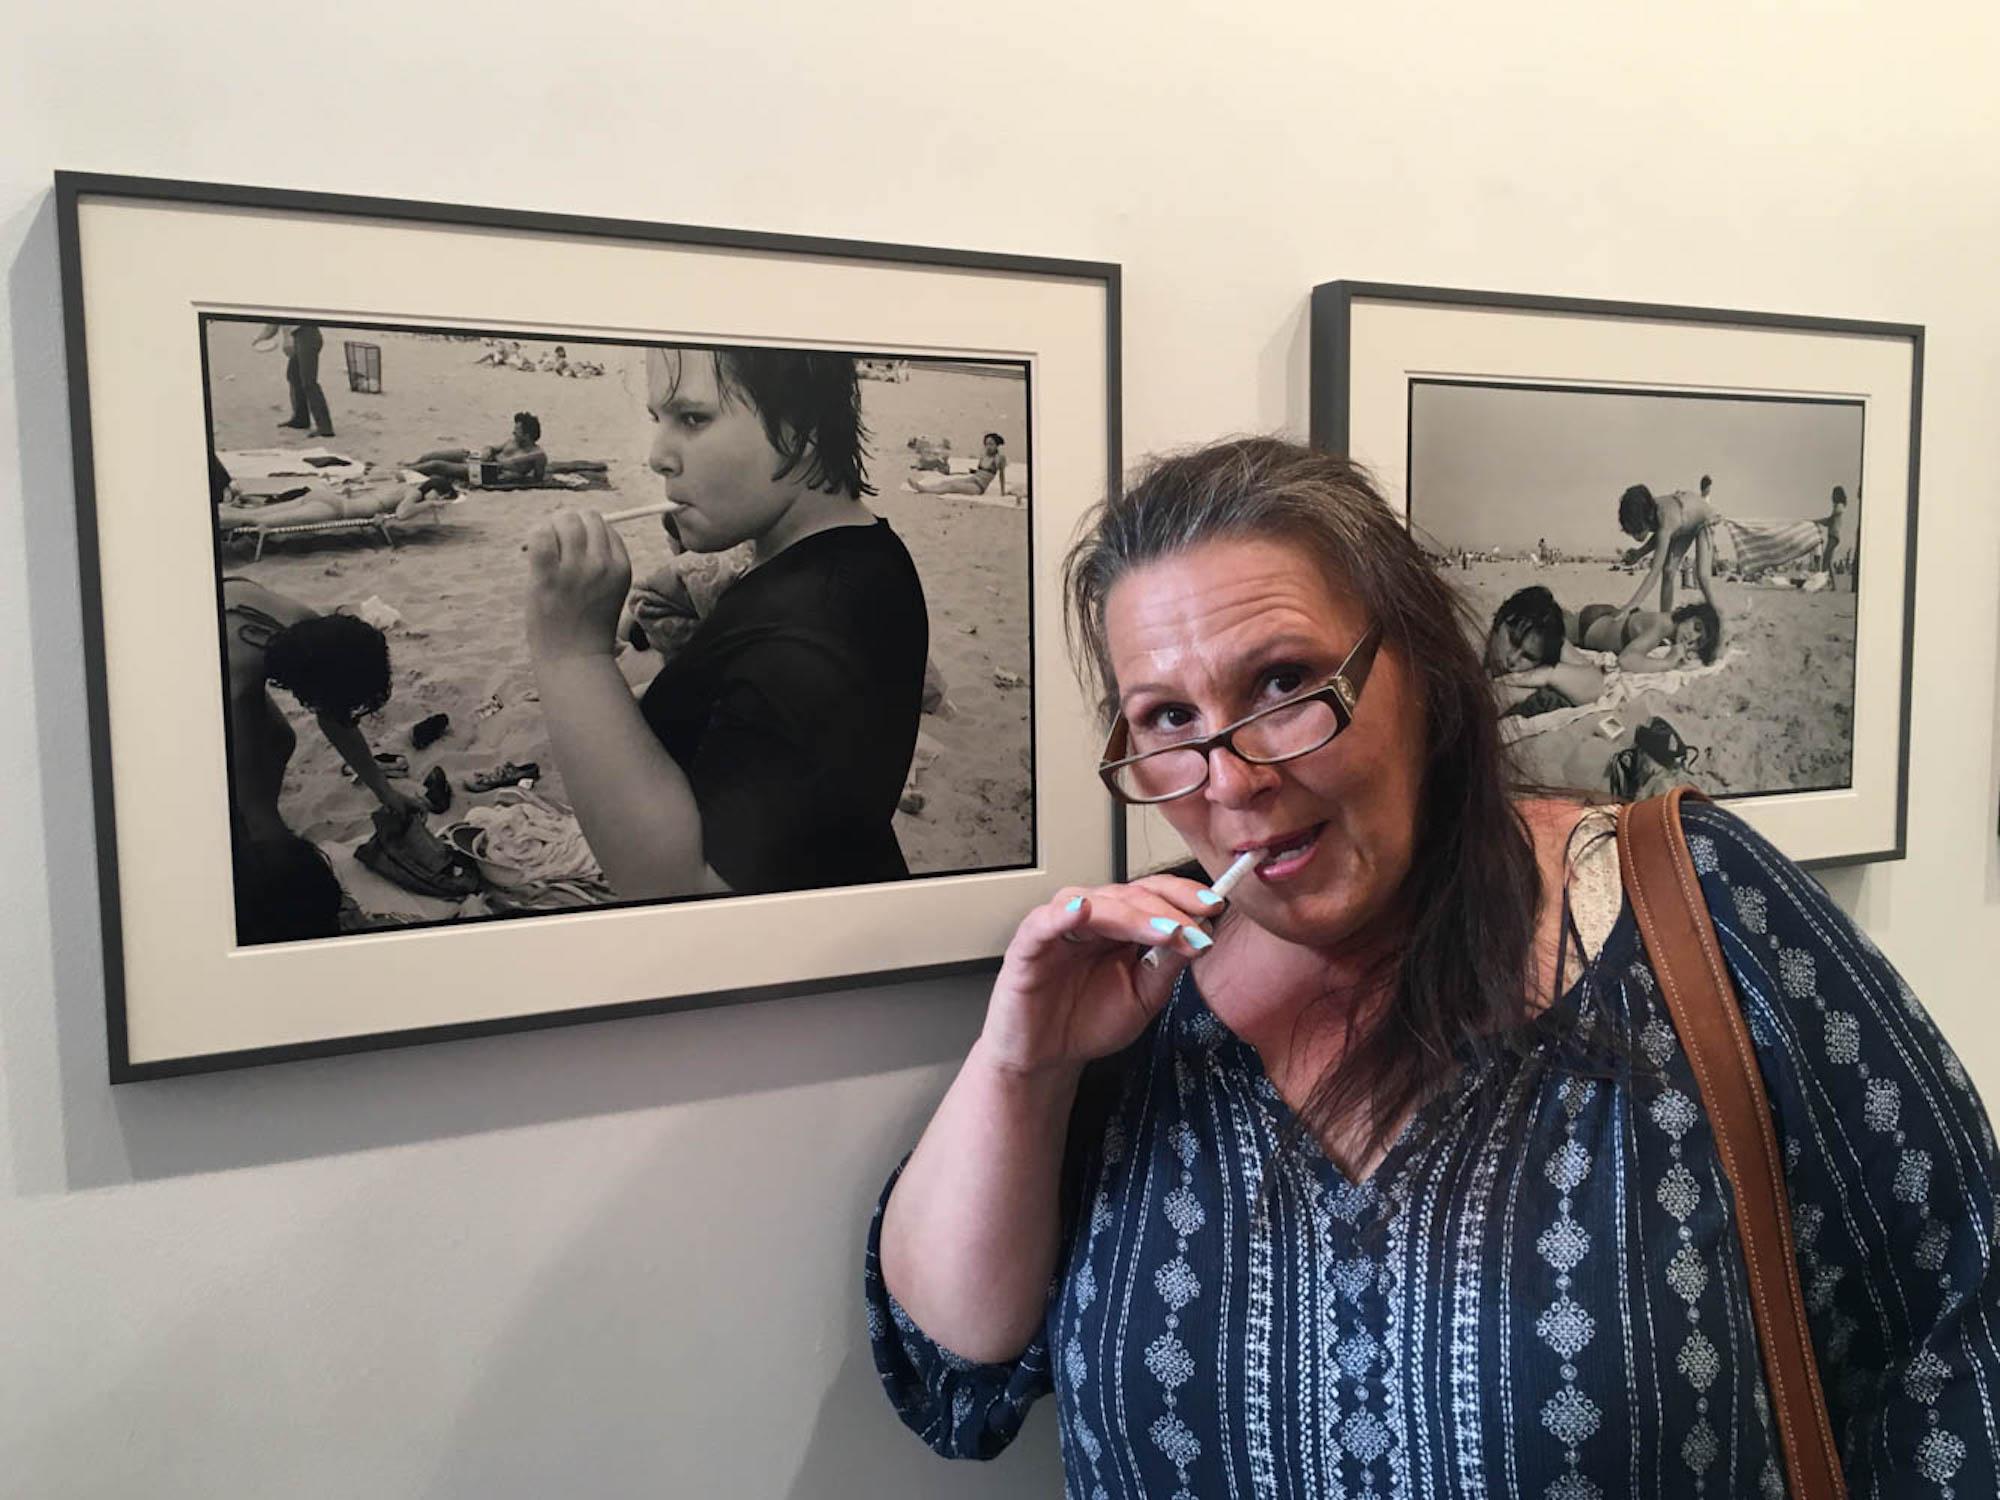 Prince Street Girls Exhibitions - Carol poses in front of her photograph at the Prince...